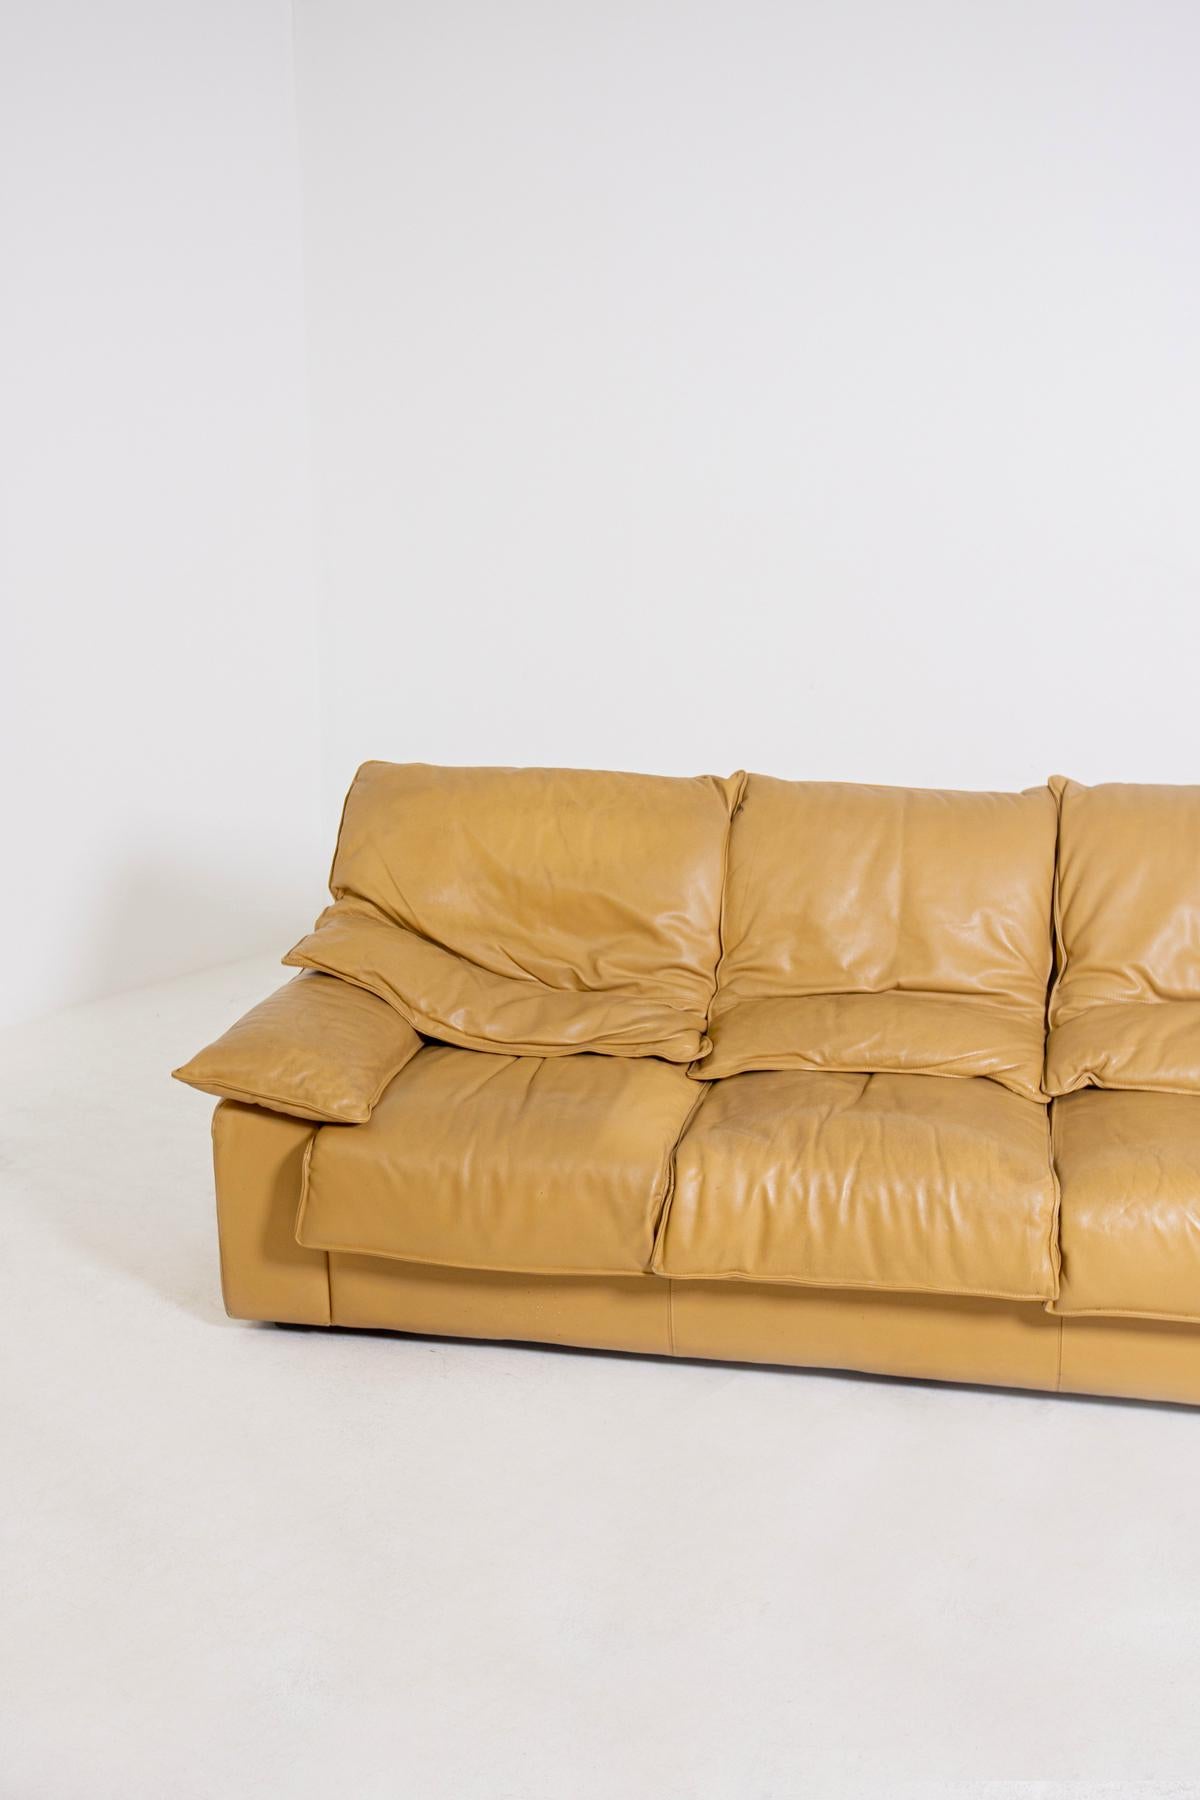 vintage italian couch